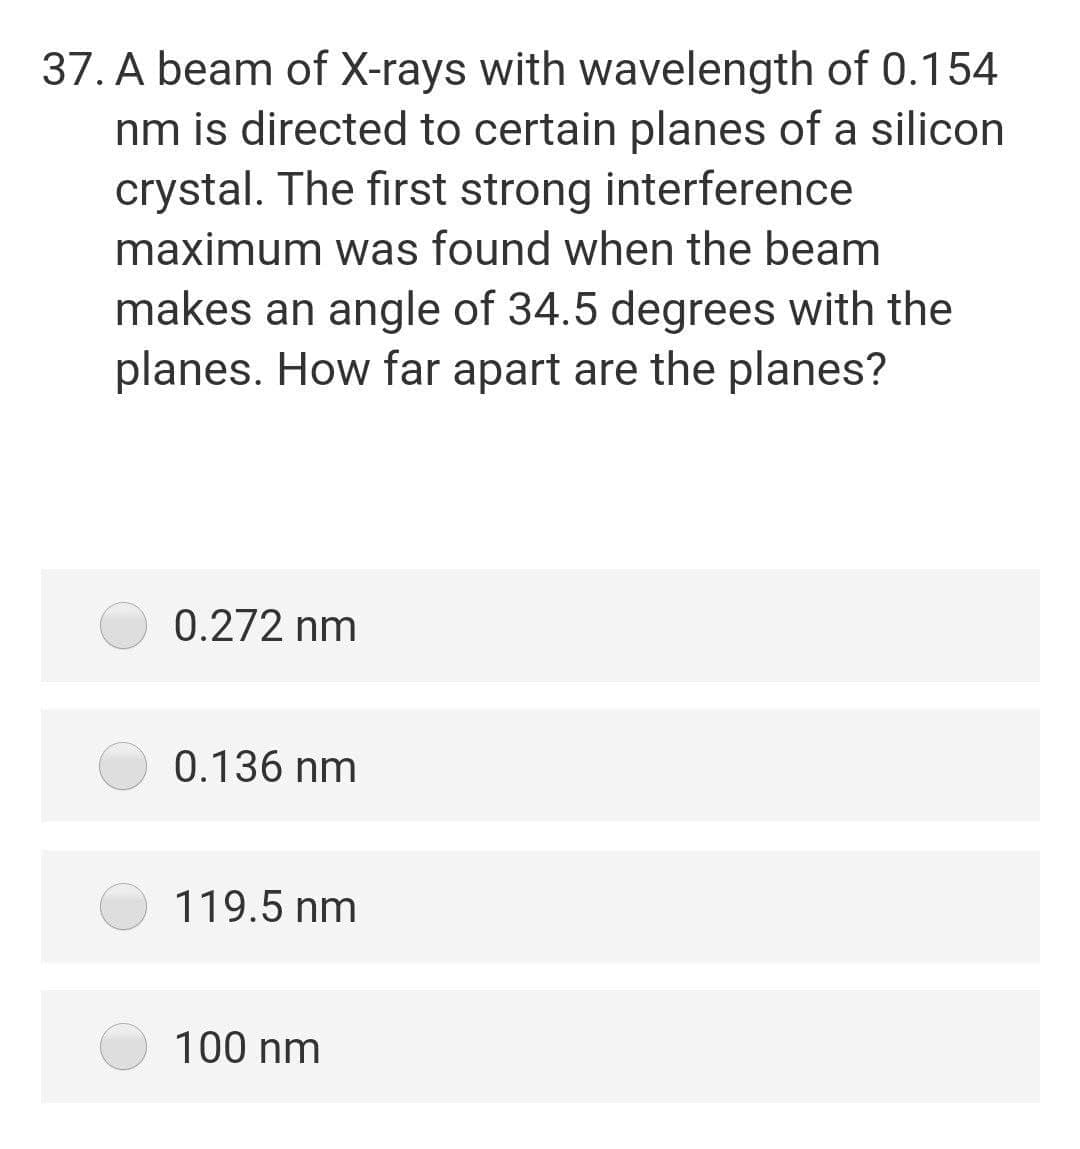 37. A beam of X-rays with wavelength of 0.154
nm is directed to certain planes of a silicon
crystal. The first strong interference
maximum was found when the beam
makes an angle of 34.5 degrees with the
planes. How far apart are the planes?
0.272 nm
0.136 nm
119.5 nm
100 nm
